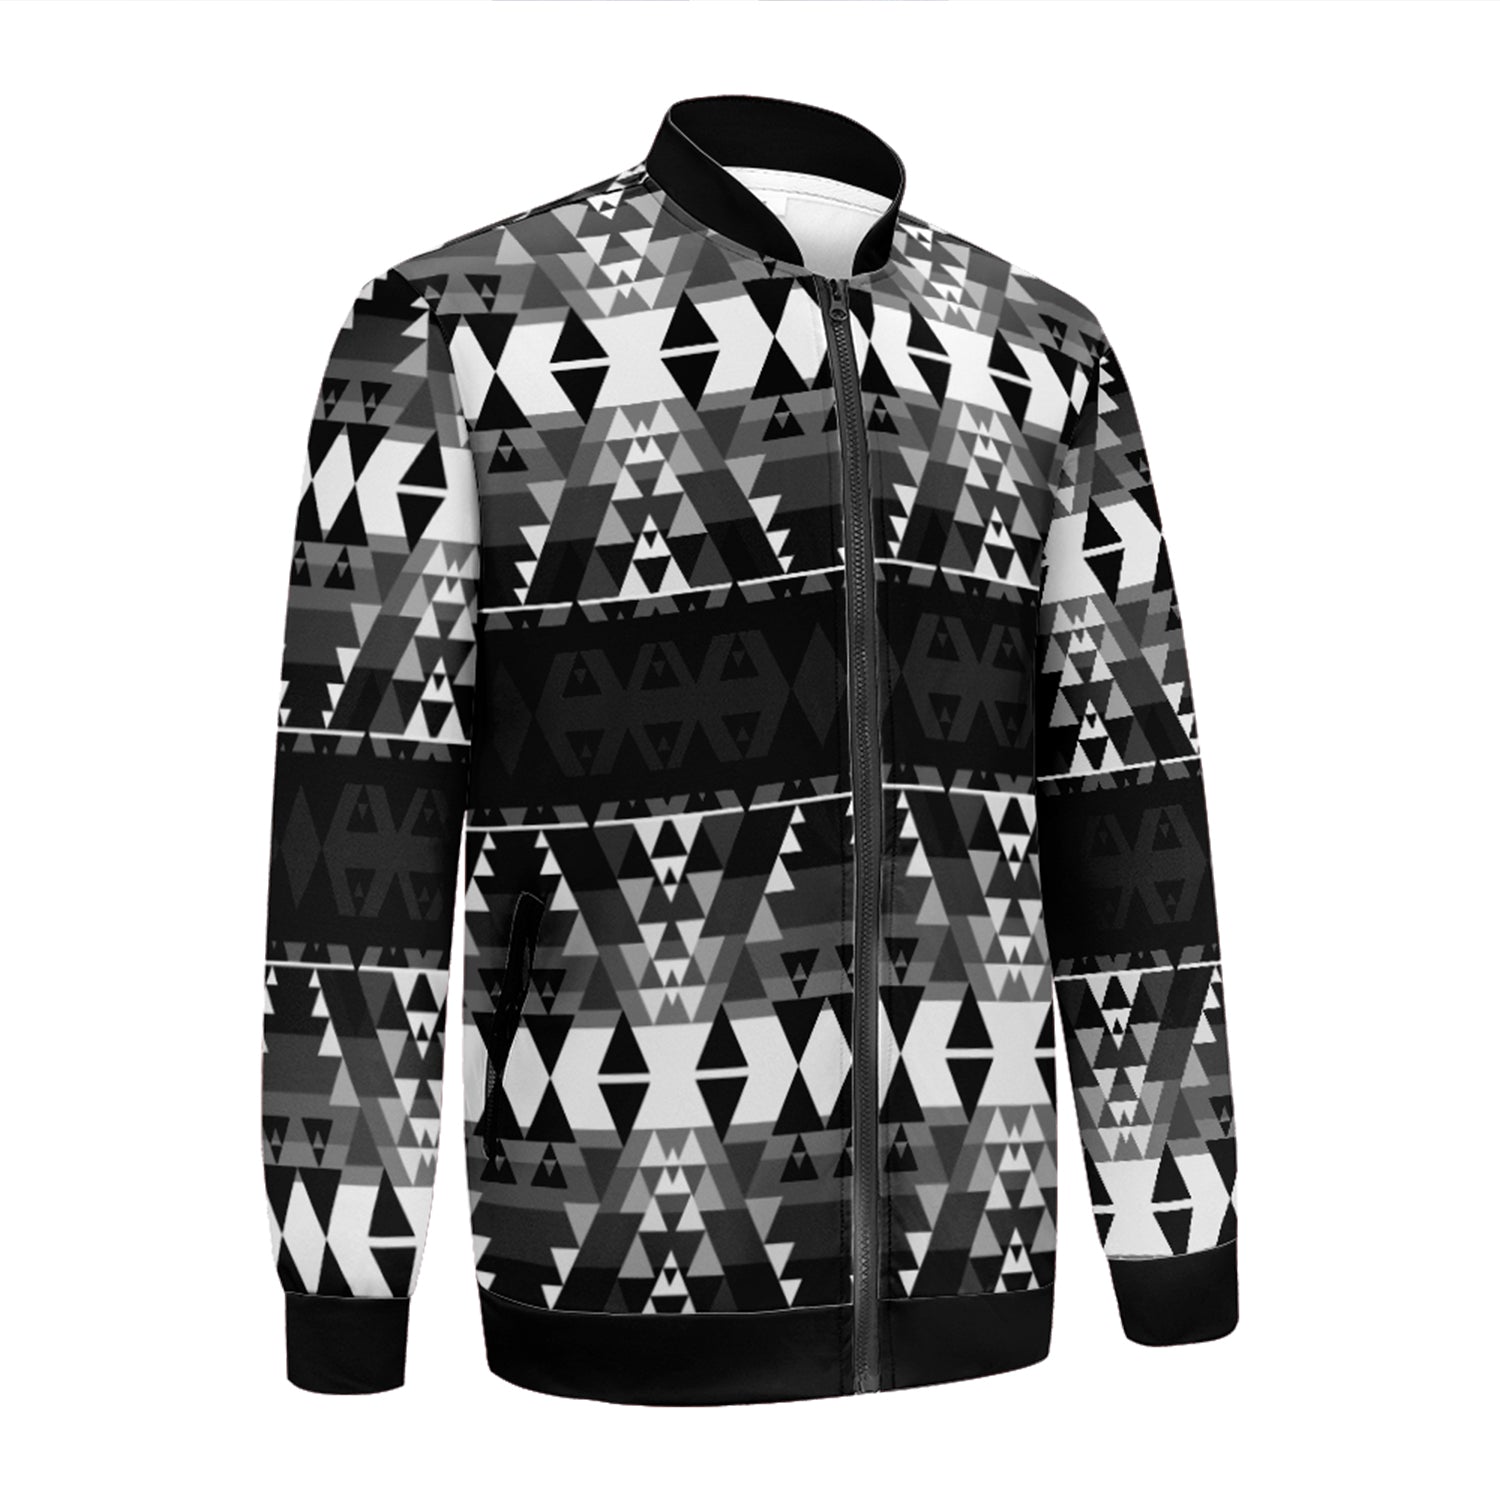 Writing on Stone Black and White Youth Zippered Collared Lightweight Jacket